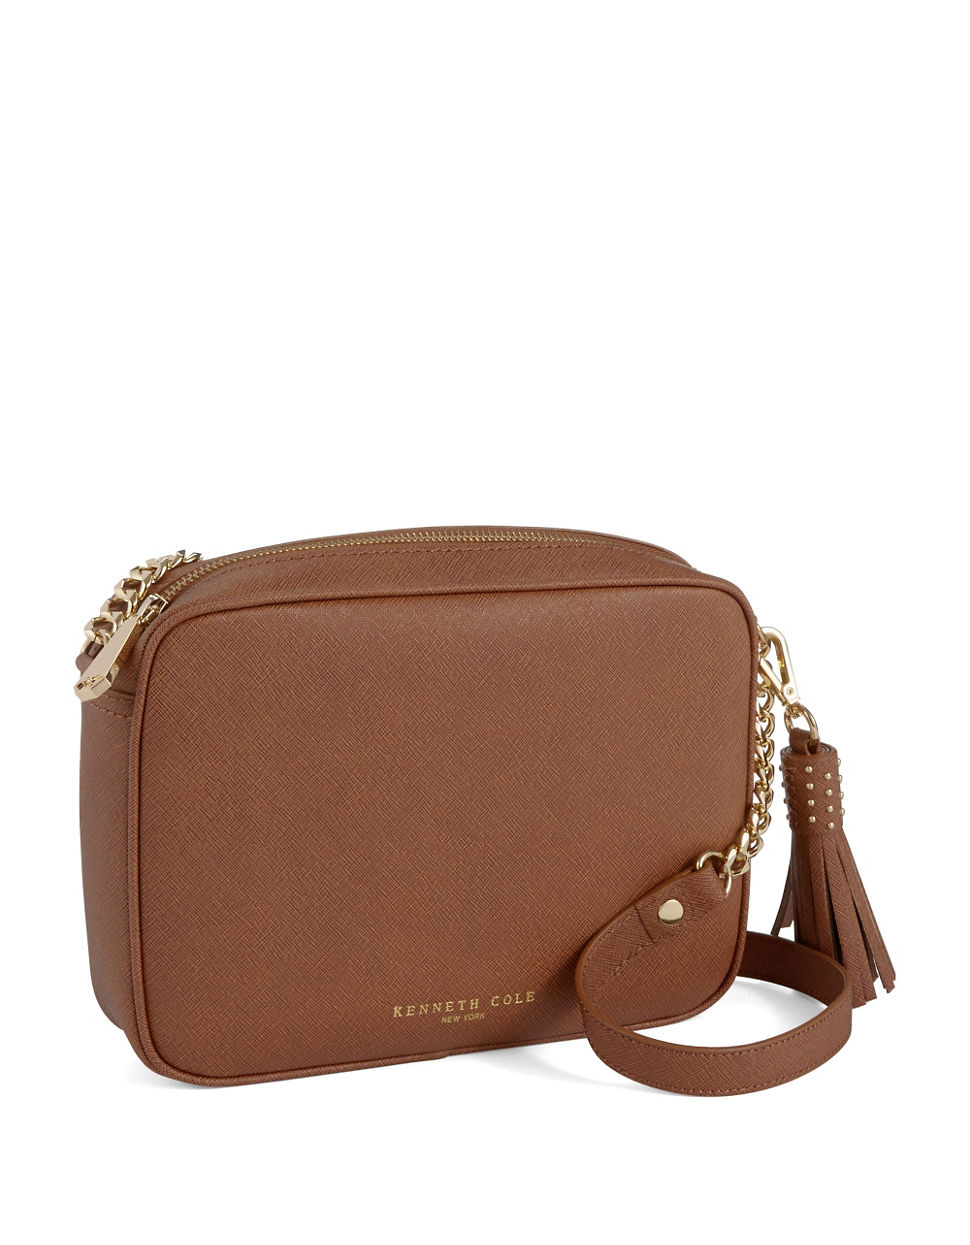 Kenneth Cole Dover Street Leather Crossbody Bag in Brown (Cognac) | Lyst